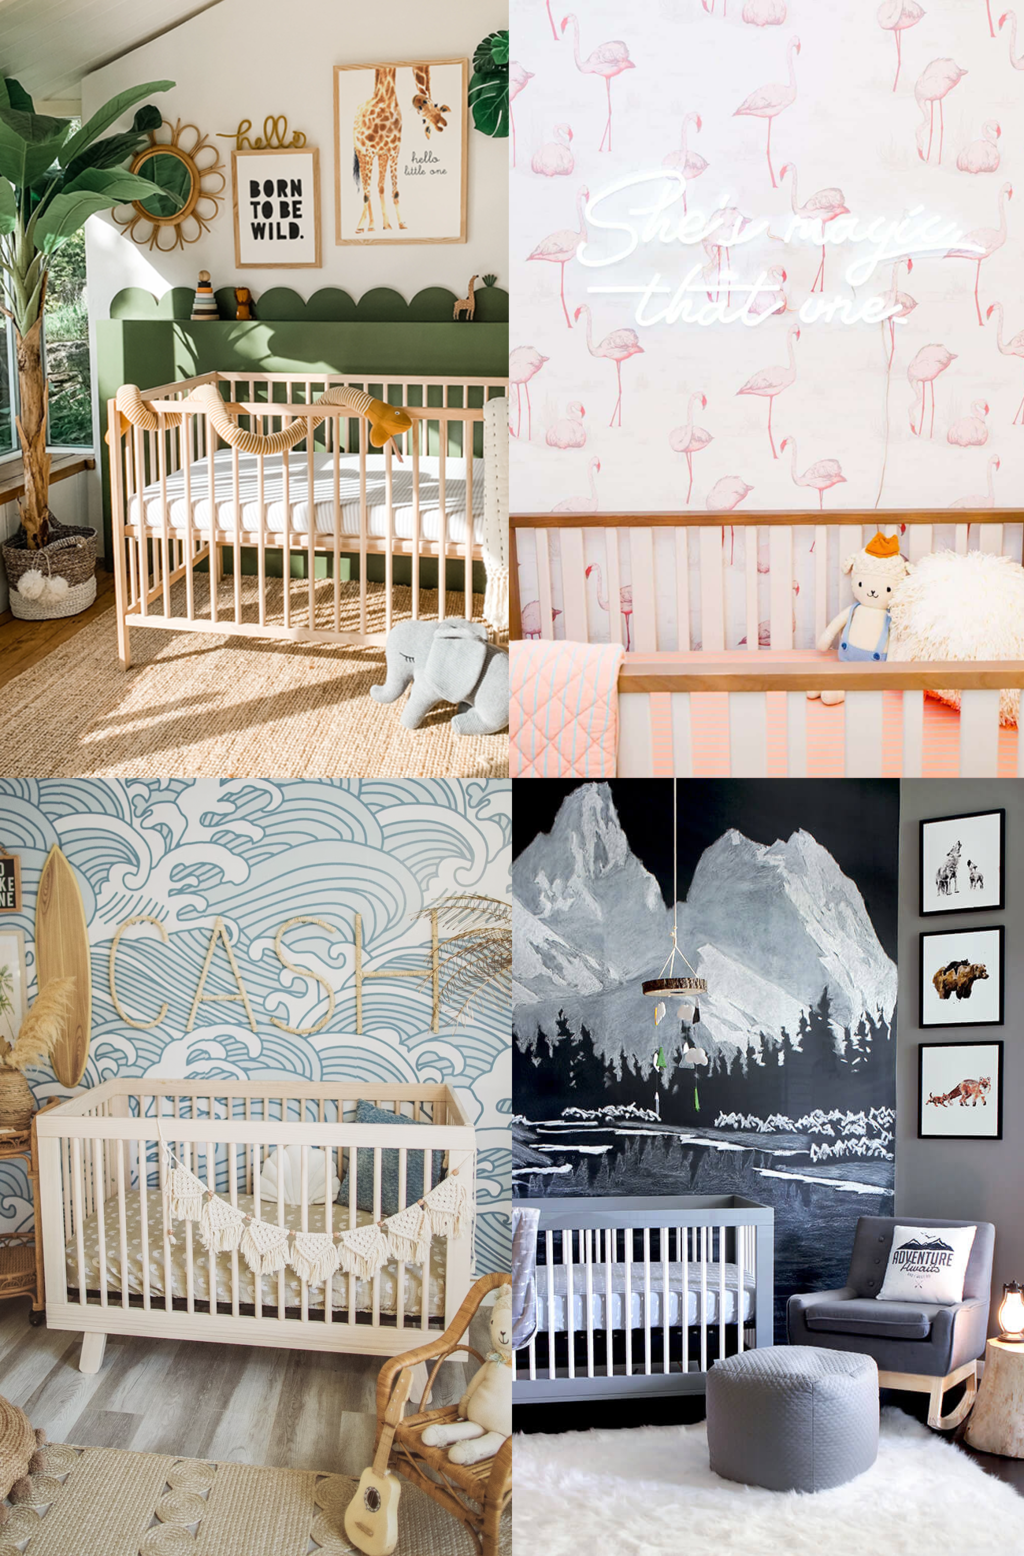 30 Baby Room Ideas for Your New Bundle of Joy